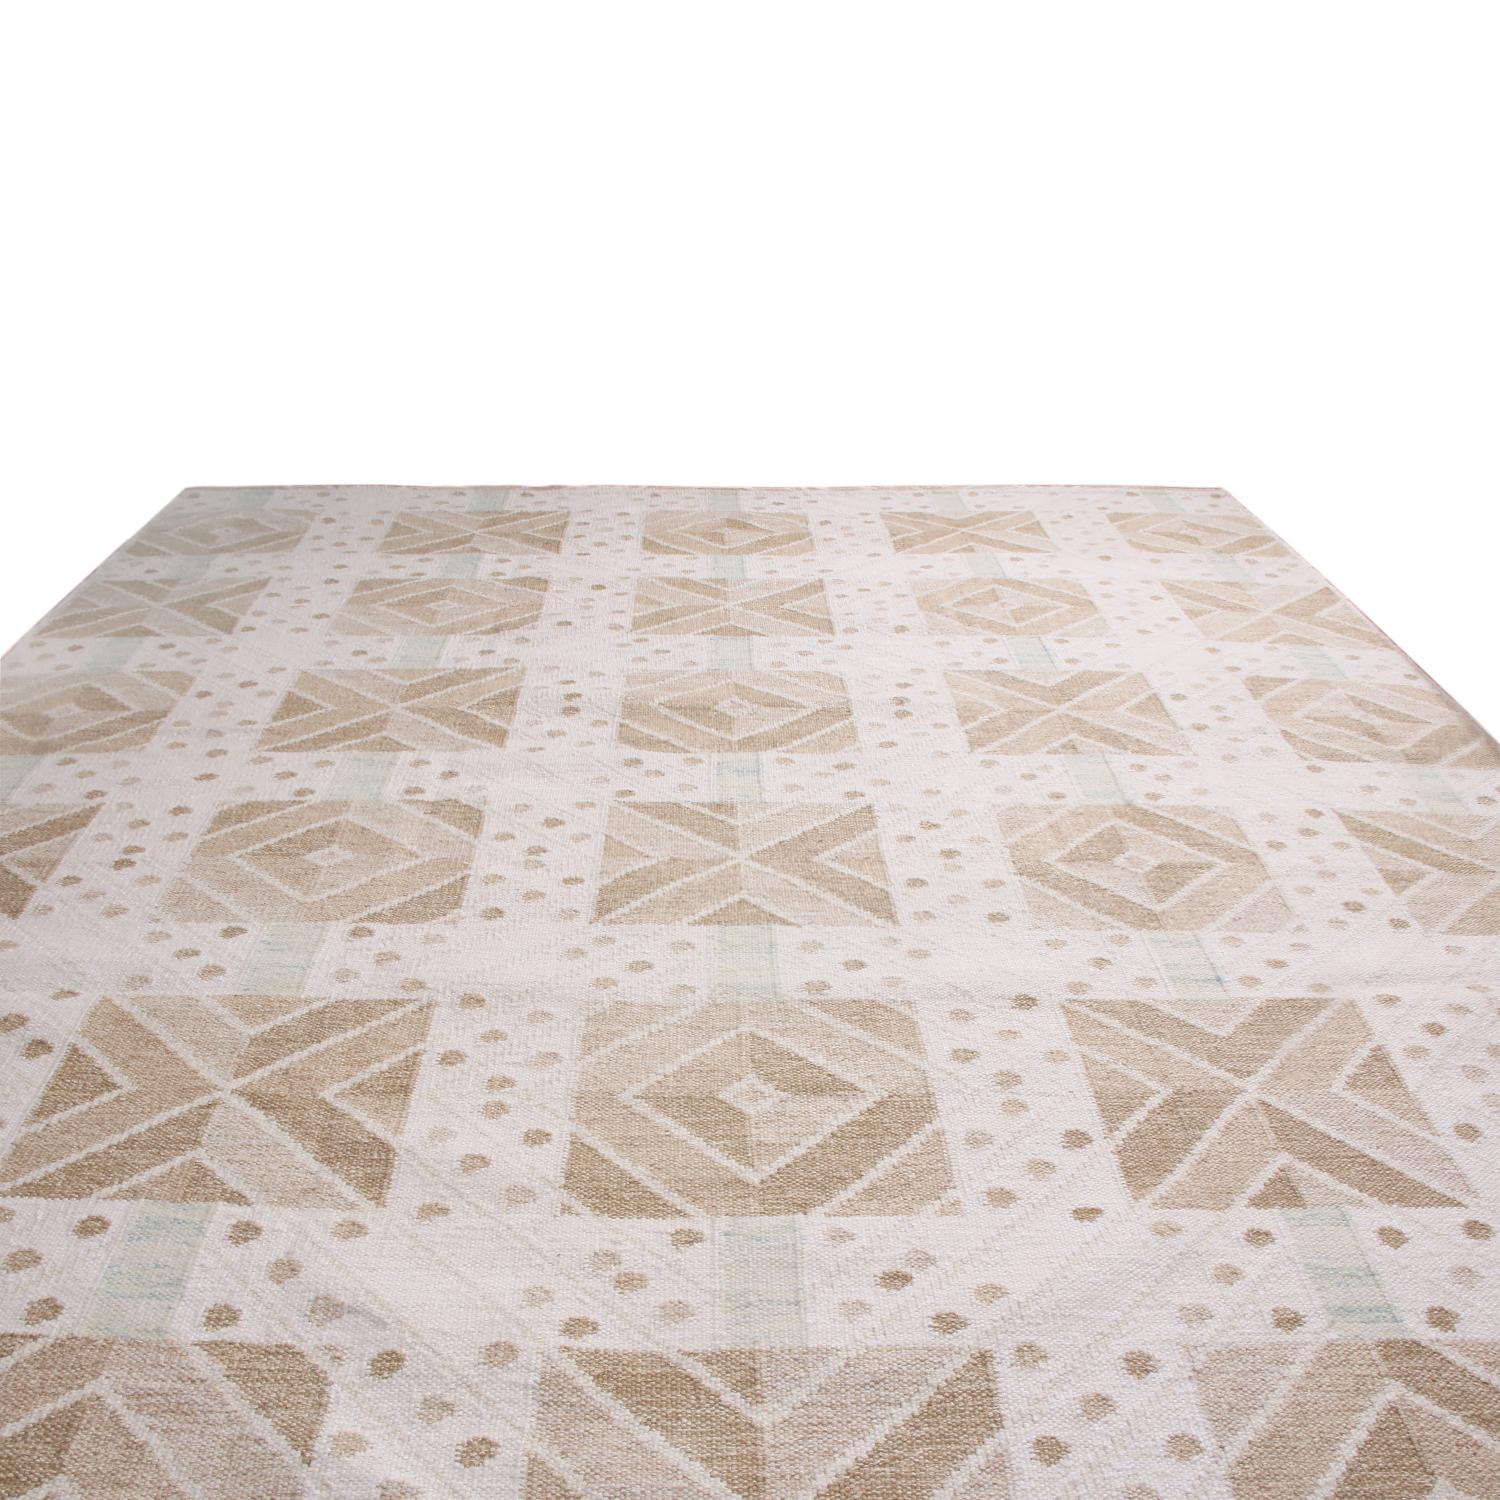 Rug & Kilim’s handwoven Swedish-style rug hails from the latest natural wool flat-weave additions to the Scandinavian Collection, offering our unique, refined large-scale approach to the geometry and vintage colorways like that of their mid-century